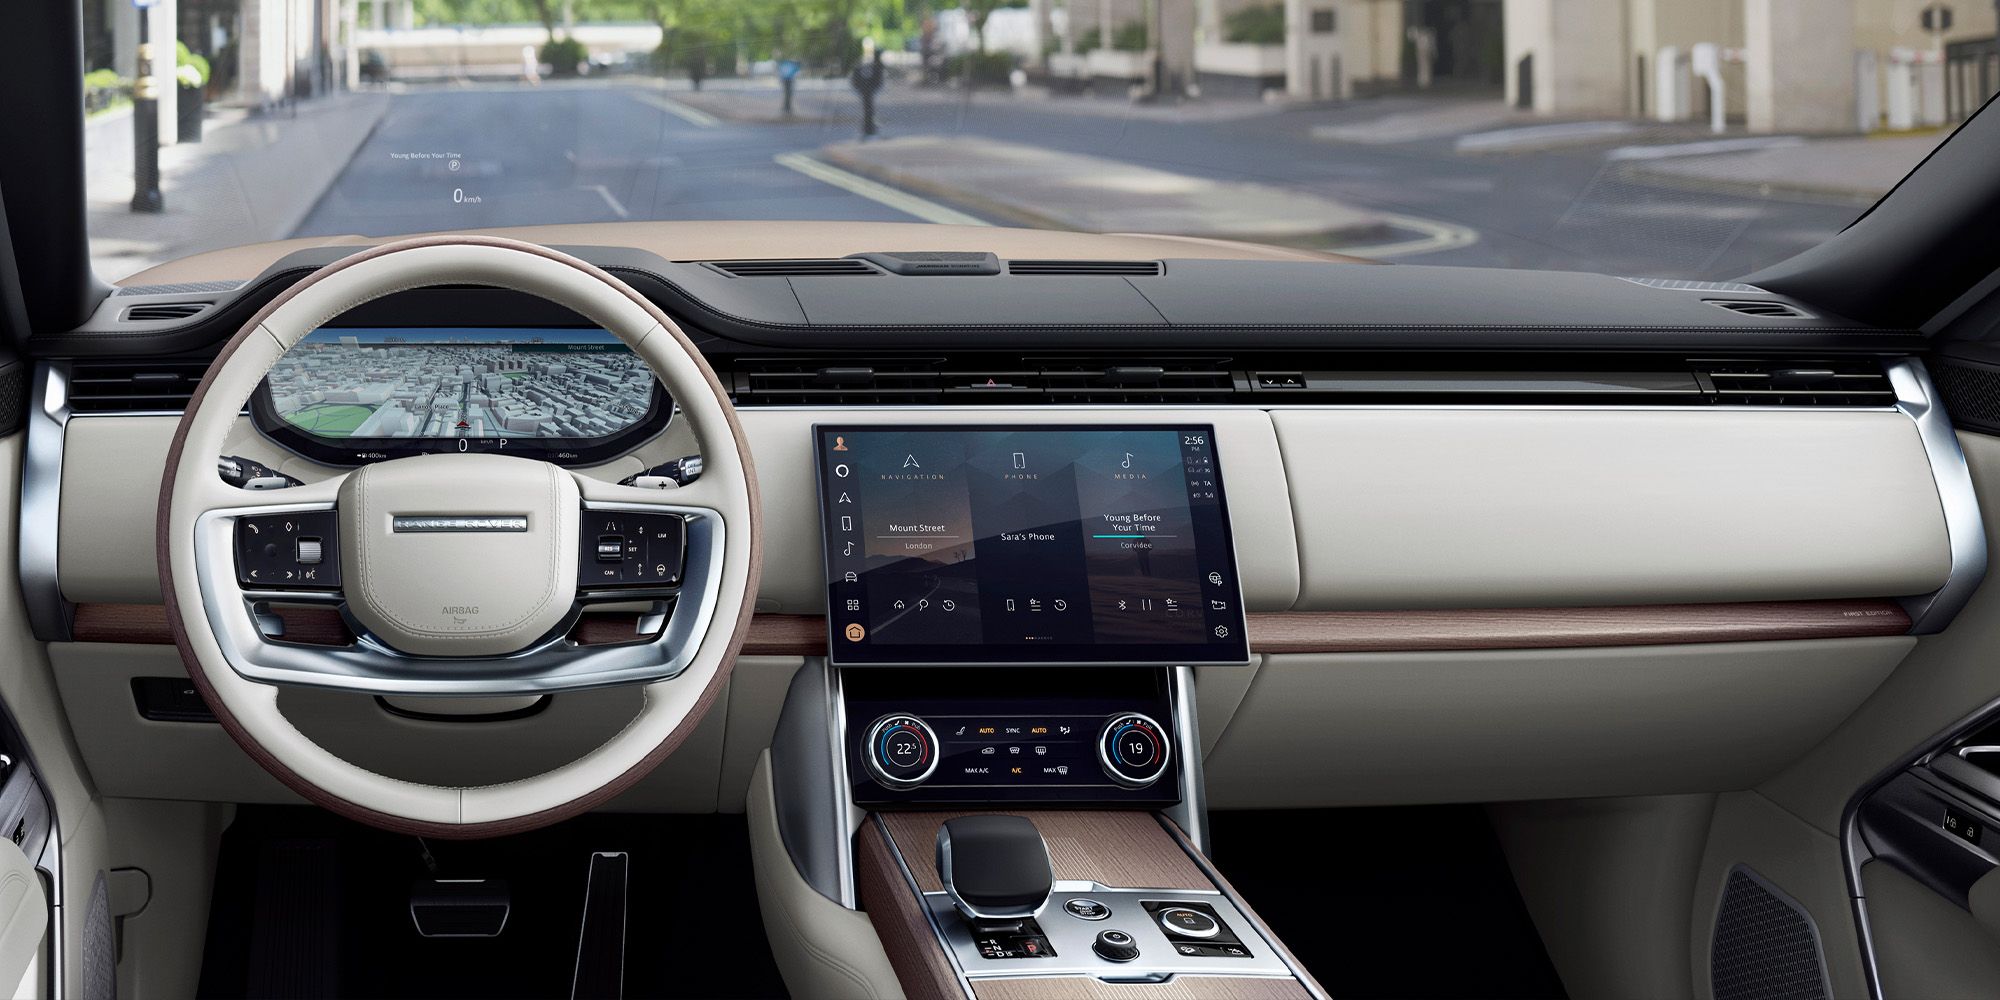 The interior of the new Range Rover, behind the wheel